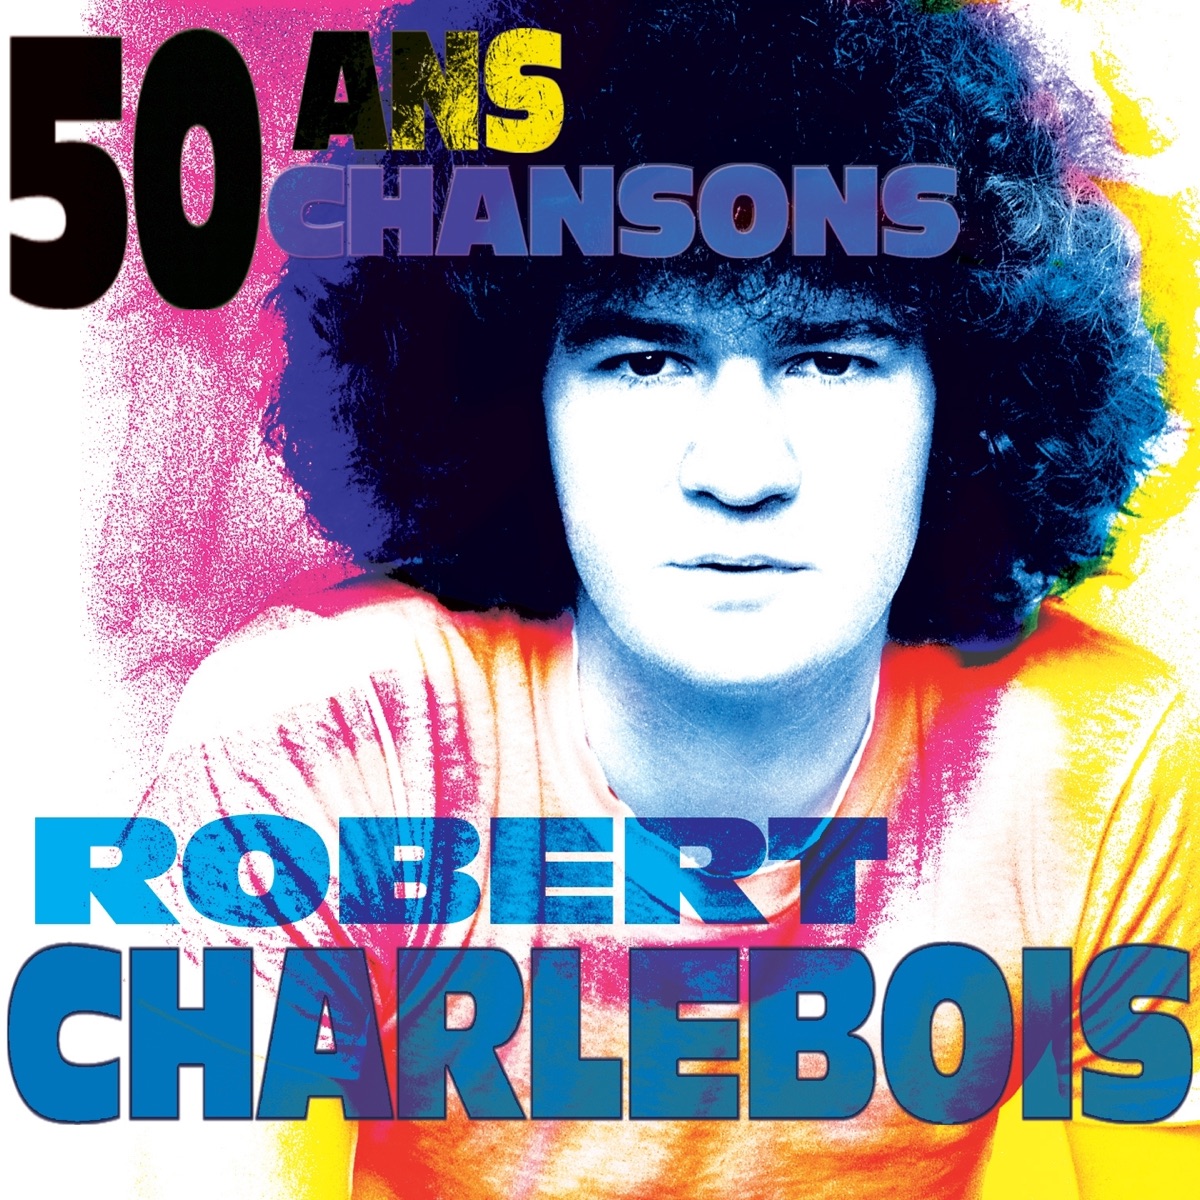 50 ans, 50 chansons by Robert Charlebois on Apple Music